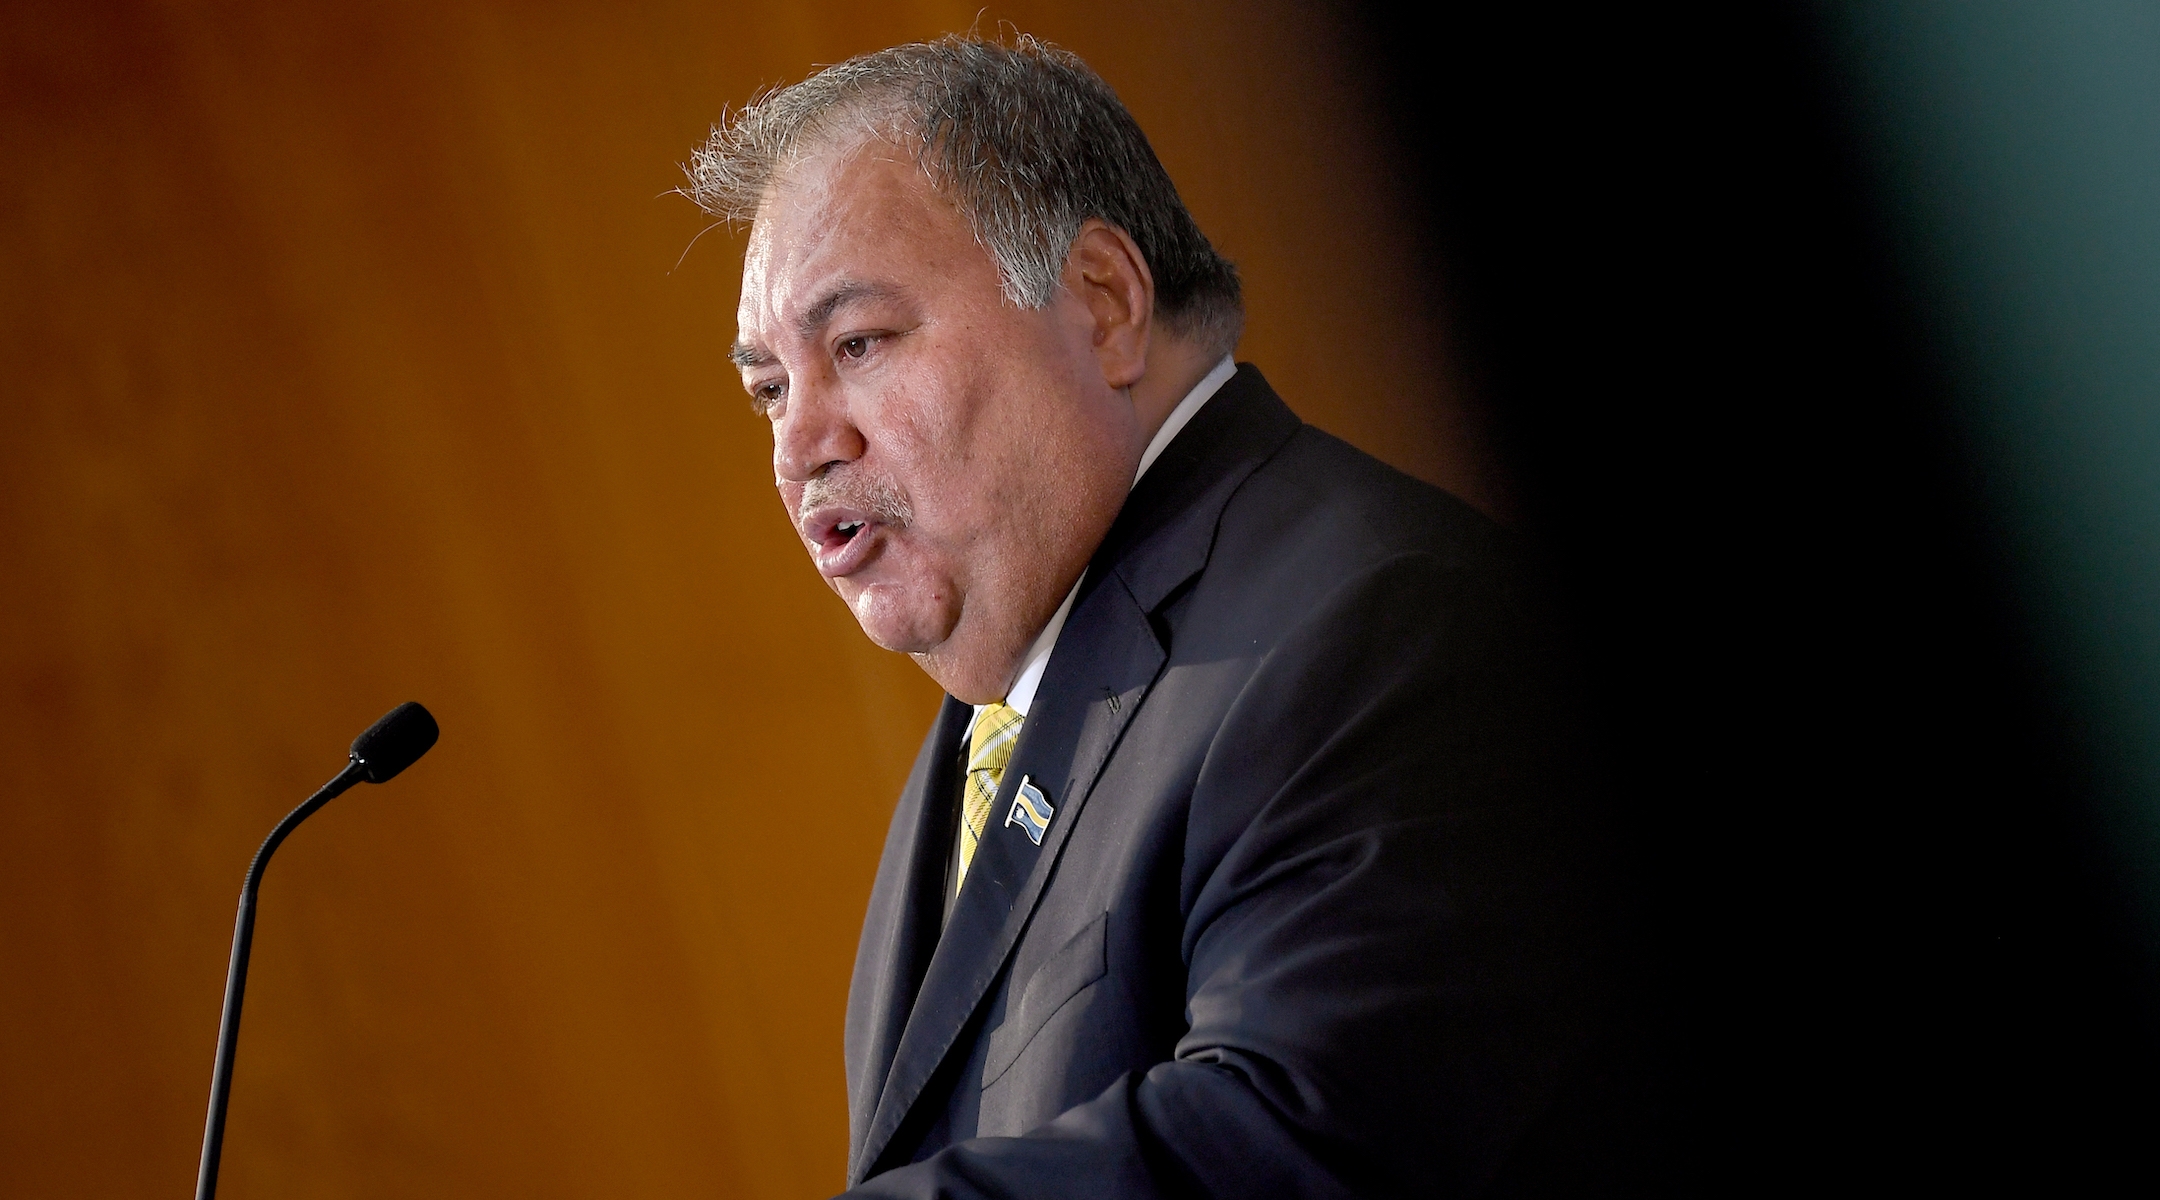 Baron Divavesi Waqa, the president of Nauru, speaks at the Berlin Climate and Security Conference, June 4, 2019. (Britta Pedersen/picture alliance via Getty Images)